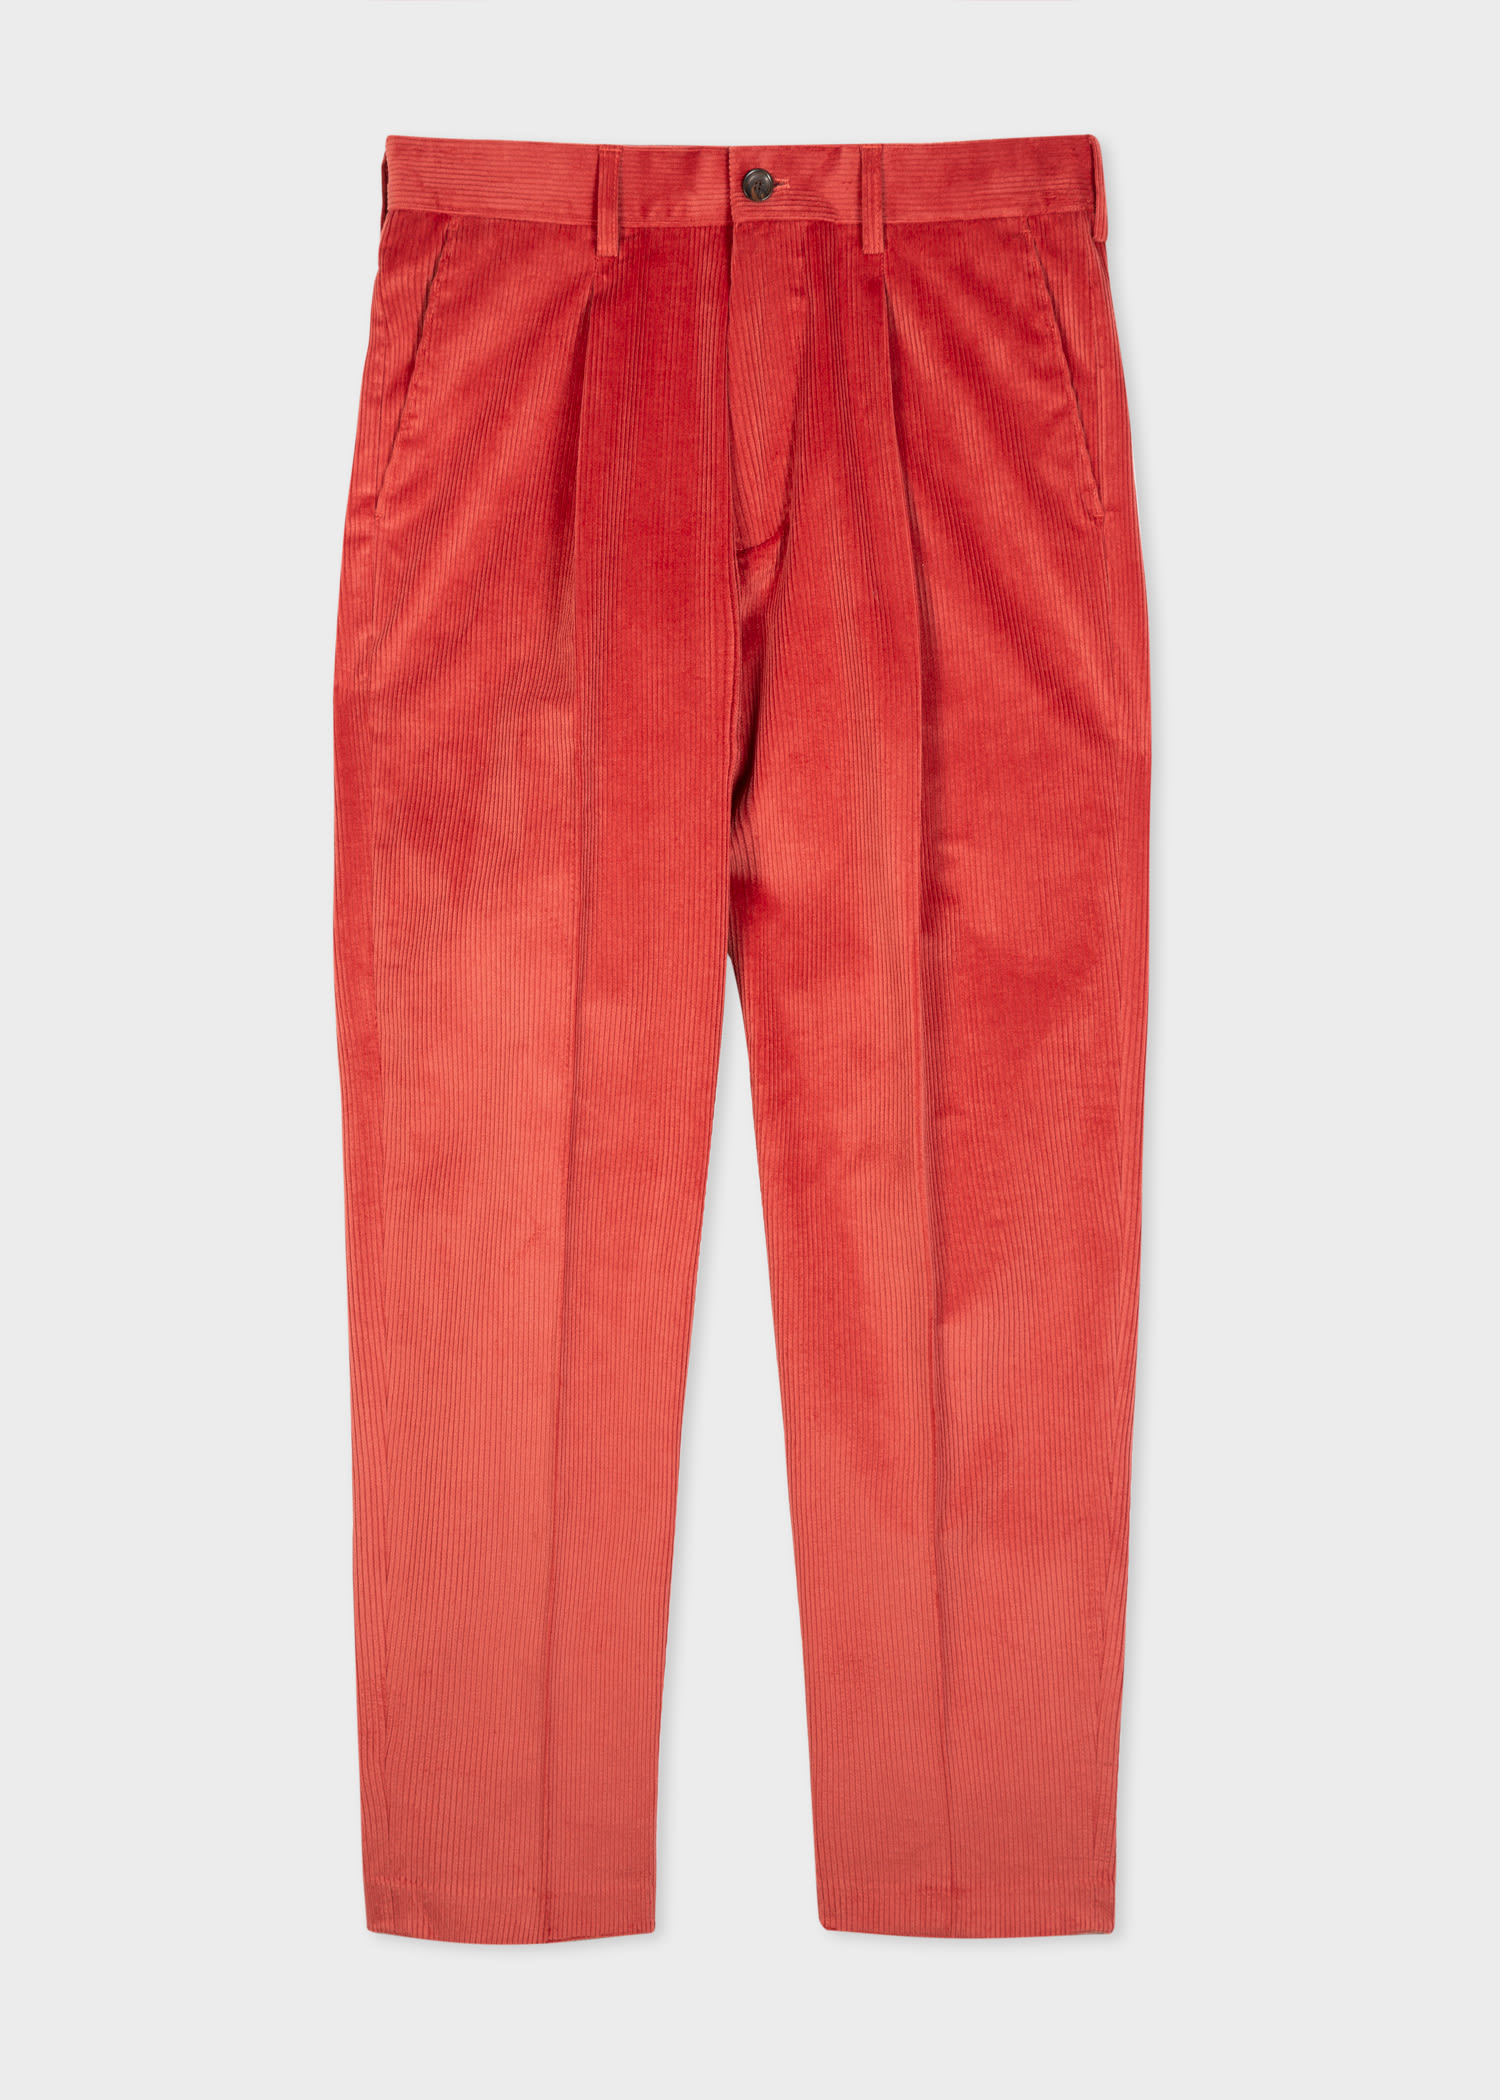 Men's Designer Trousers | Chinos, Casual, & Suit Trousers - Paul Smith